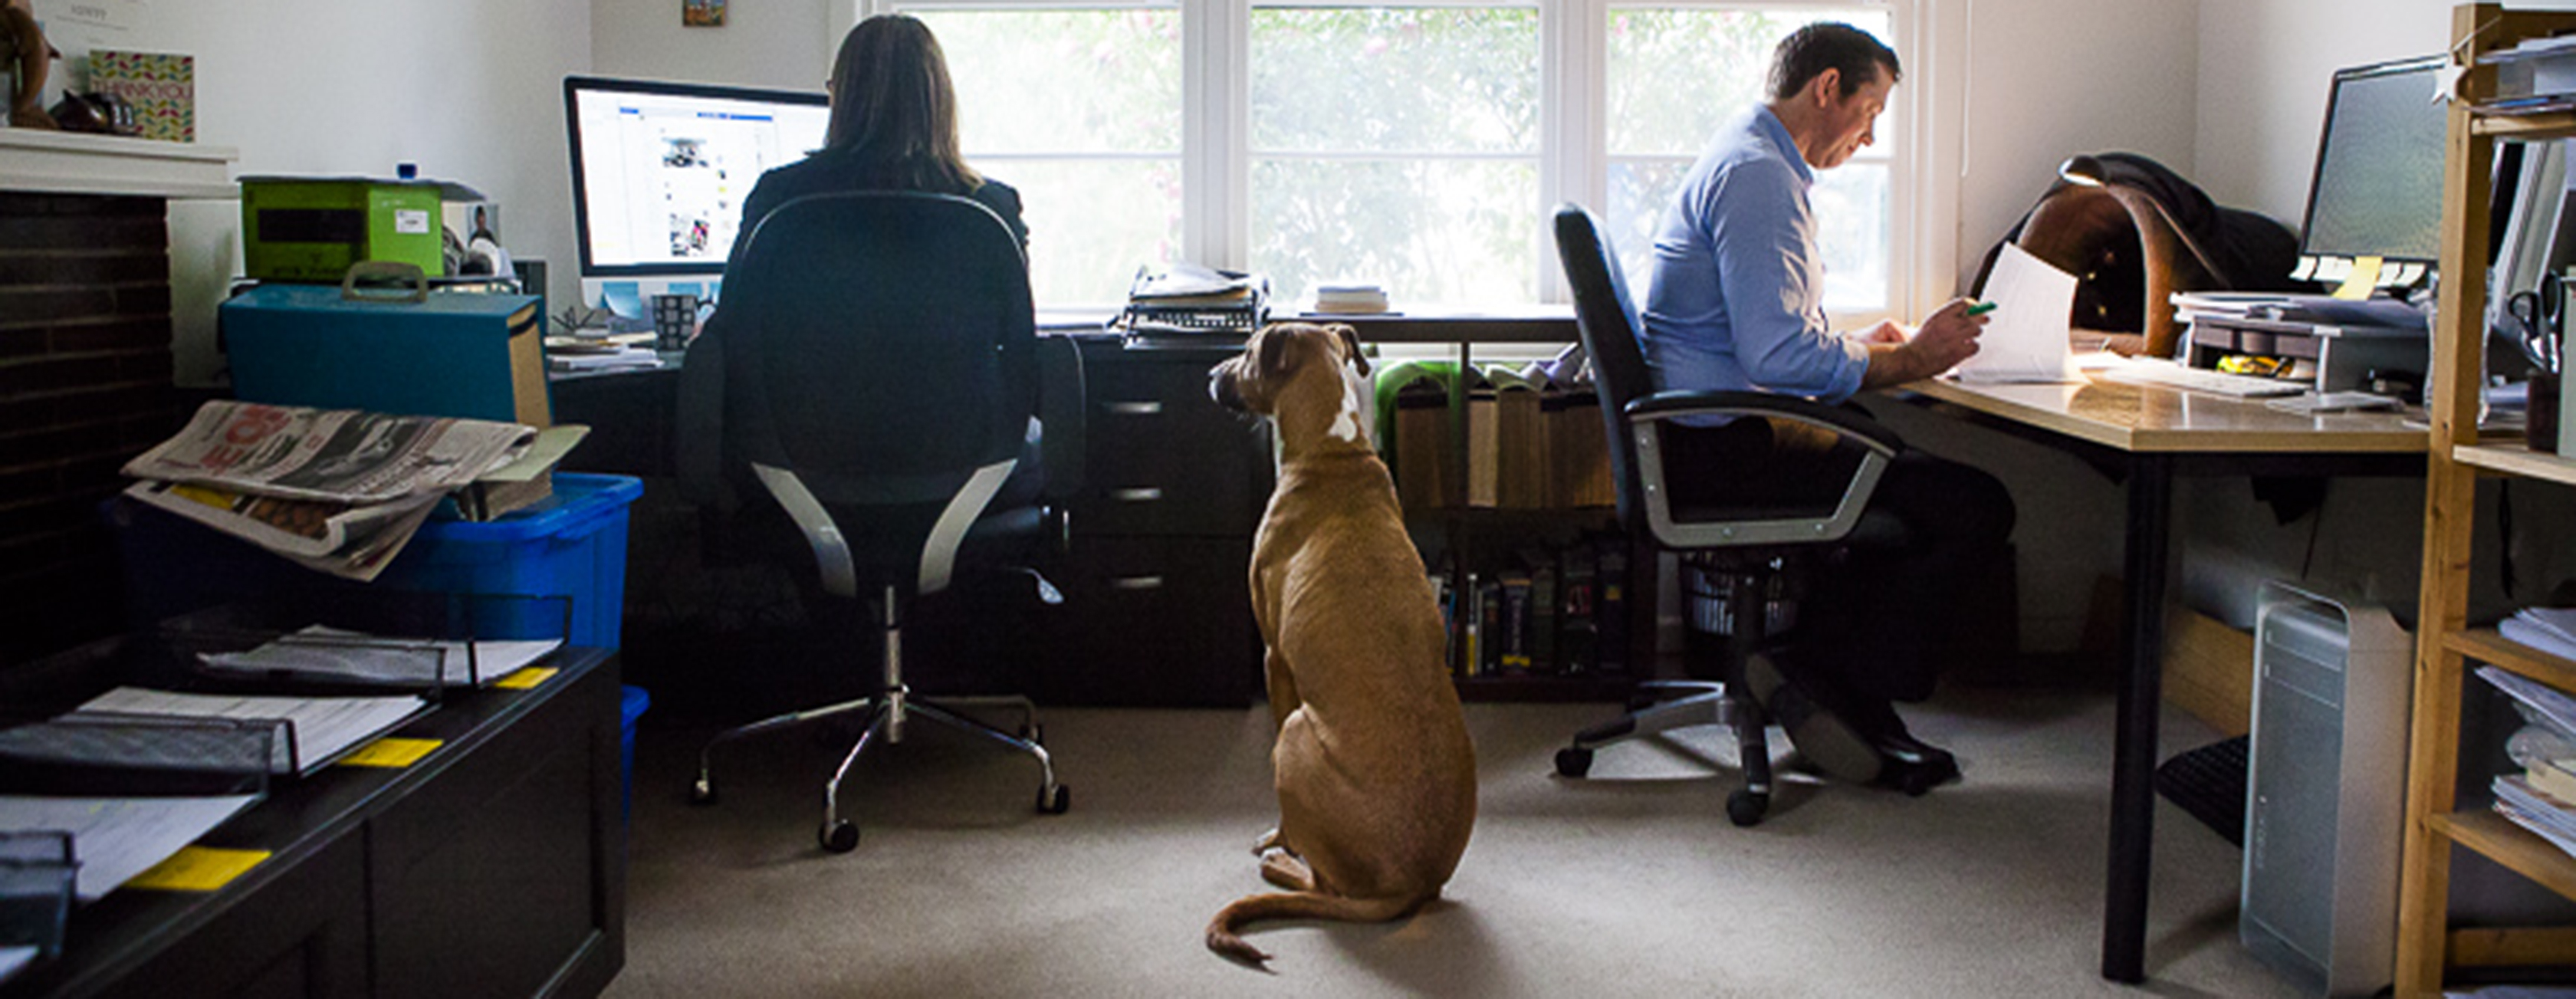 Behind the scenes at Publish Central. A somewhat serious look at a typical day